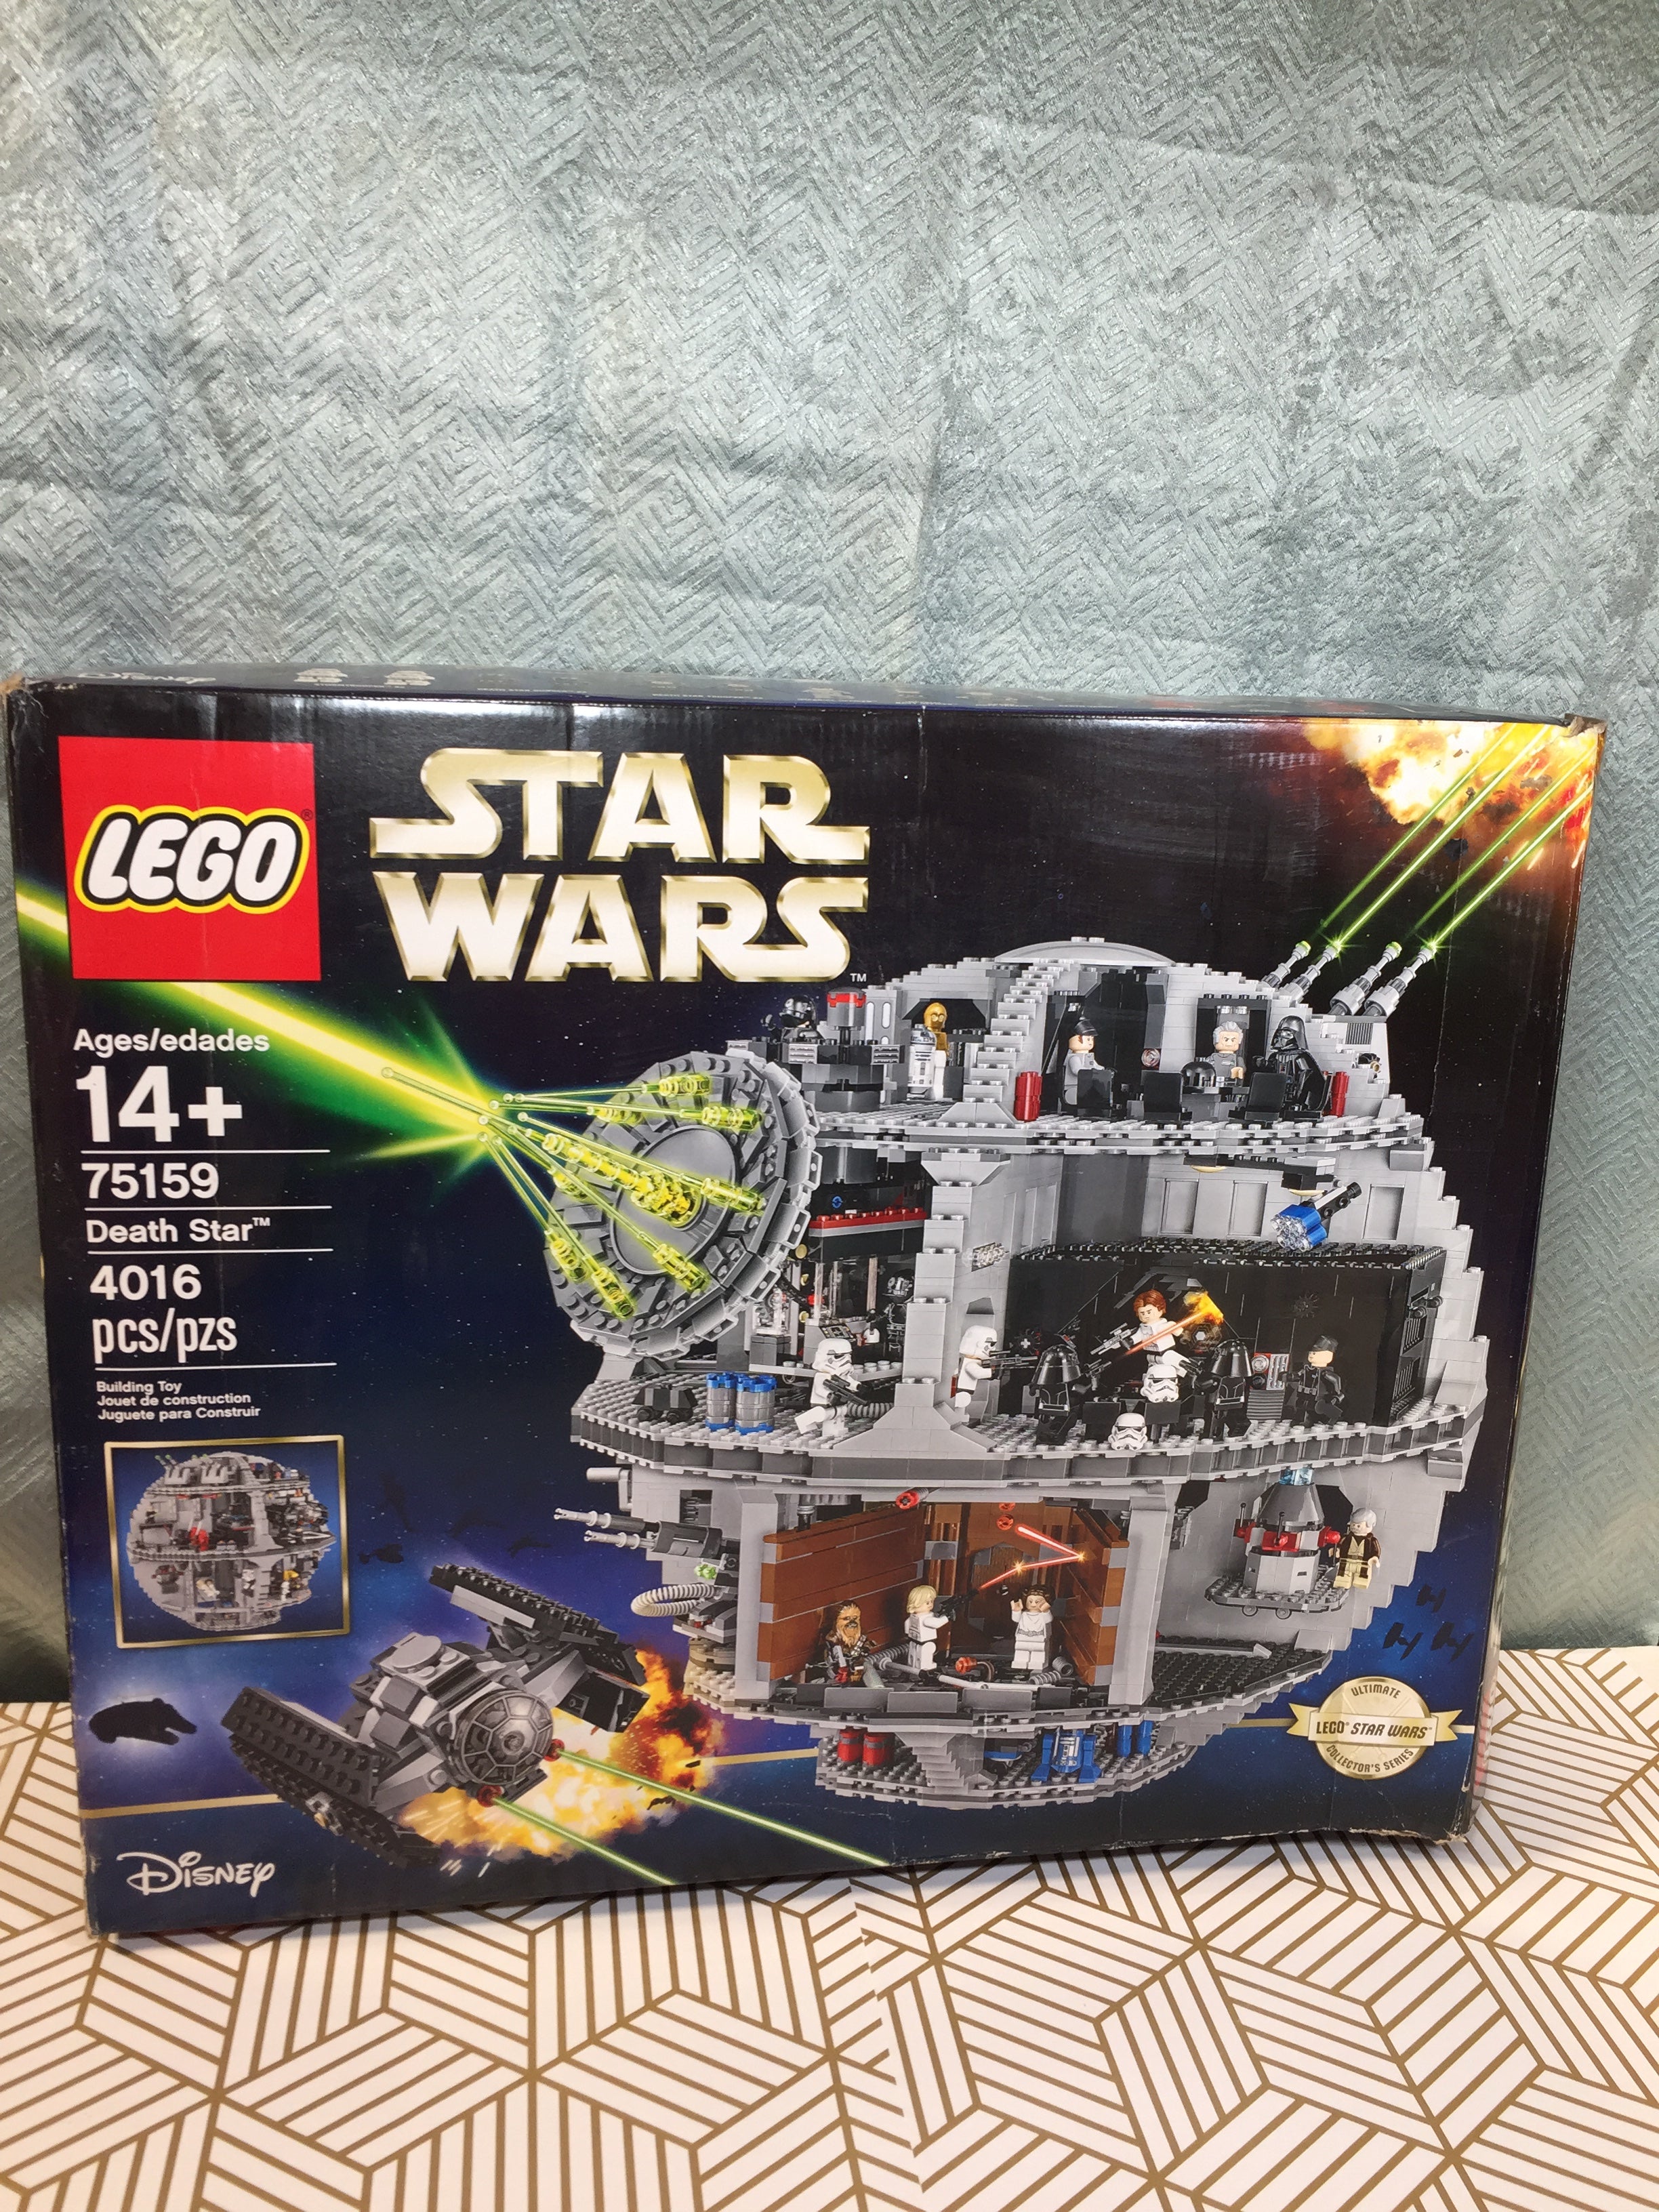 LEGO Star Wars Death Star 75159 Space Station Building Kit 4016 Pieces  Retired